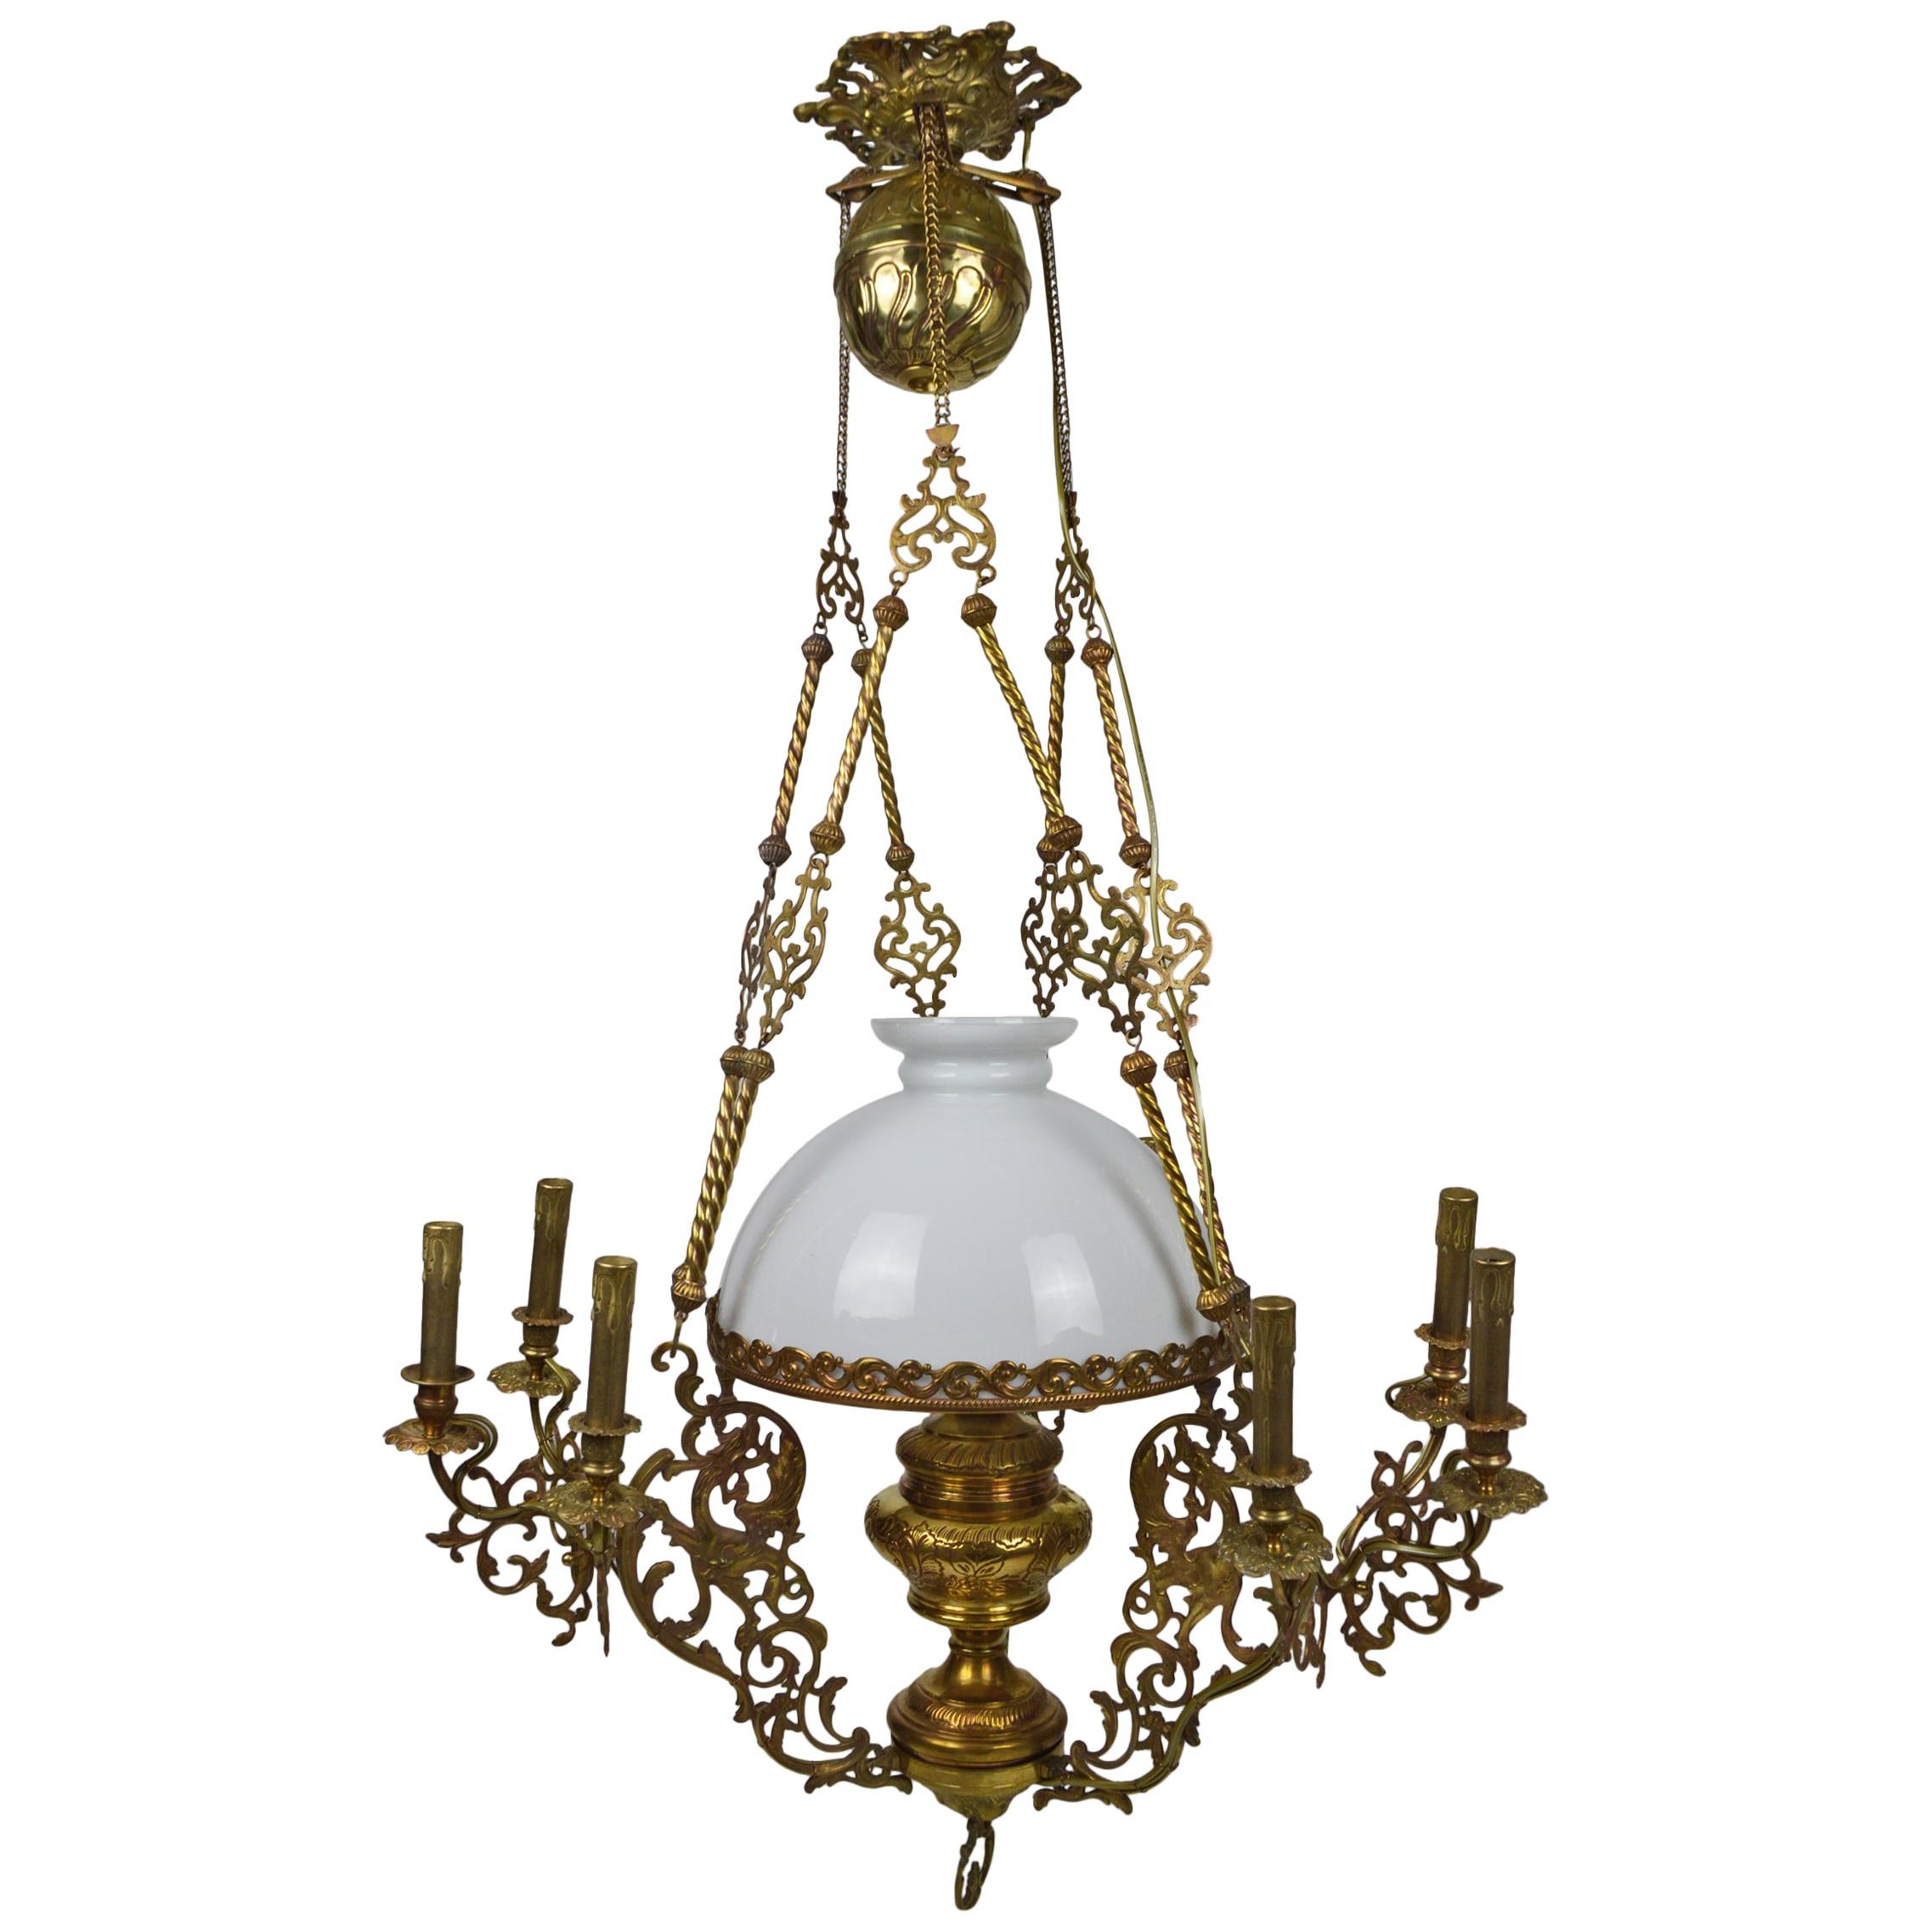 Antique Chandelier with Dragons / Chimeras, in Bronze and Brass, circa 1890 For Sale